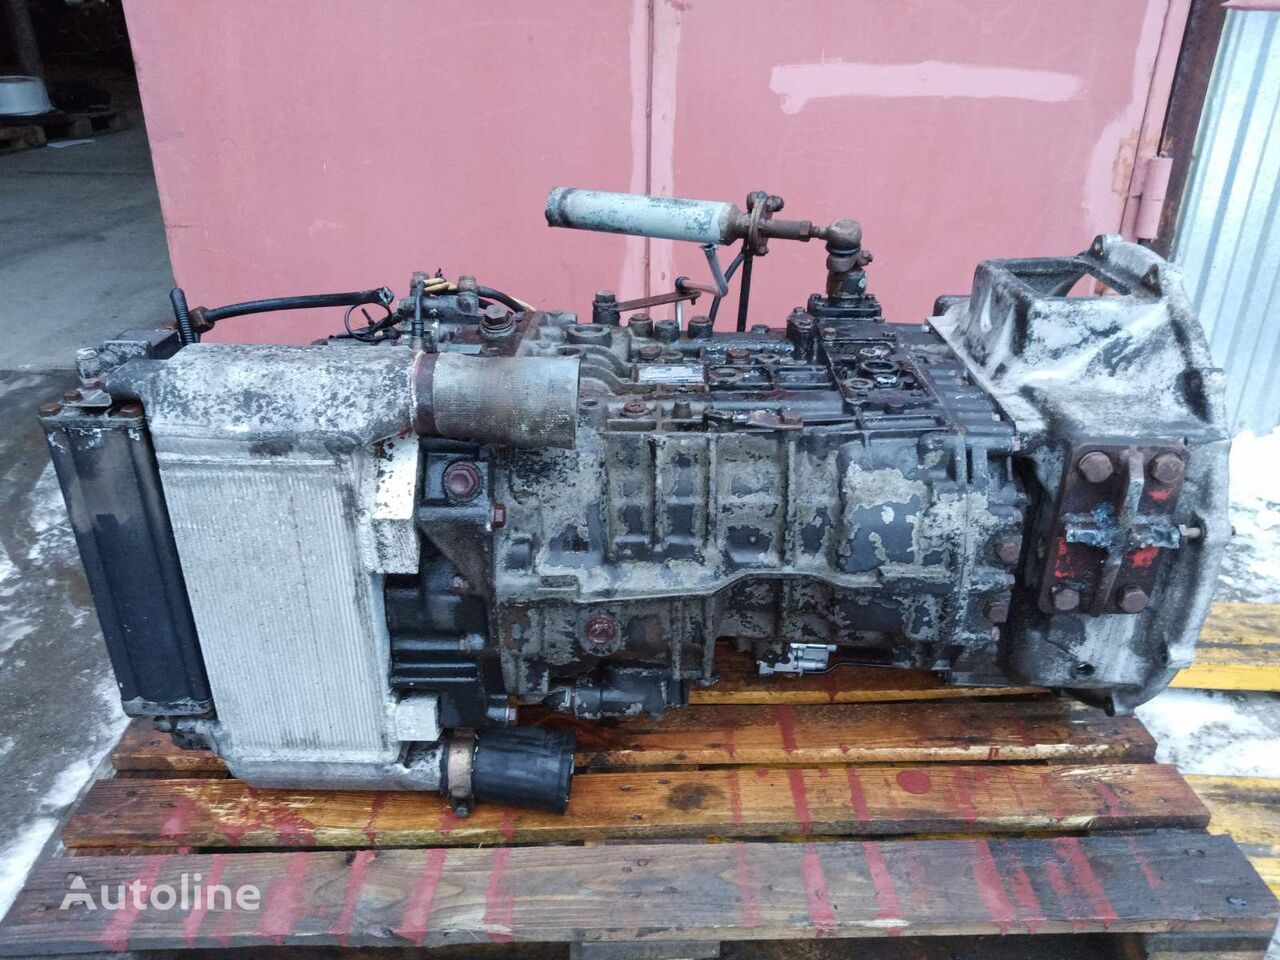 ZF 1304044027 gearbox for Setra 315 bus